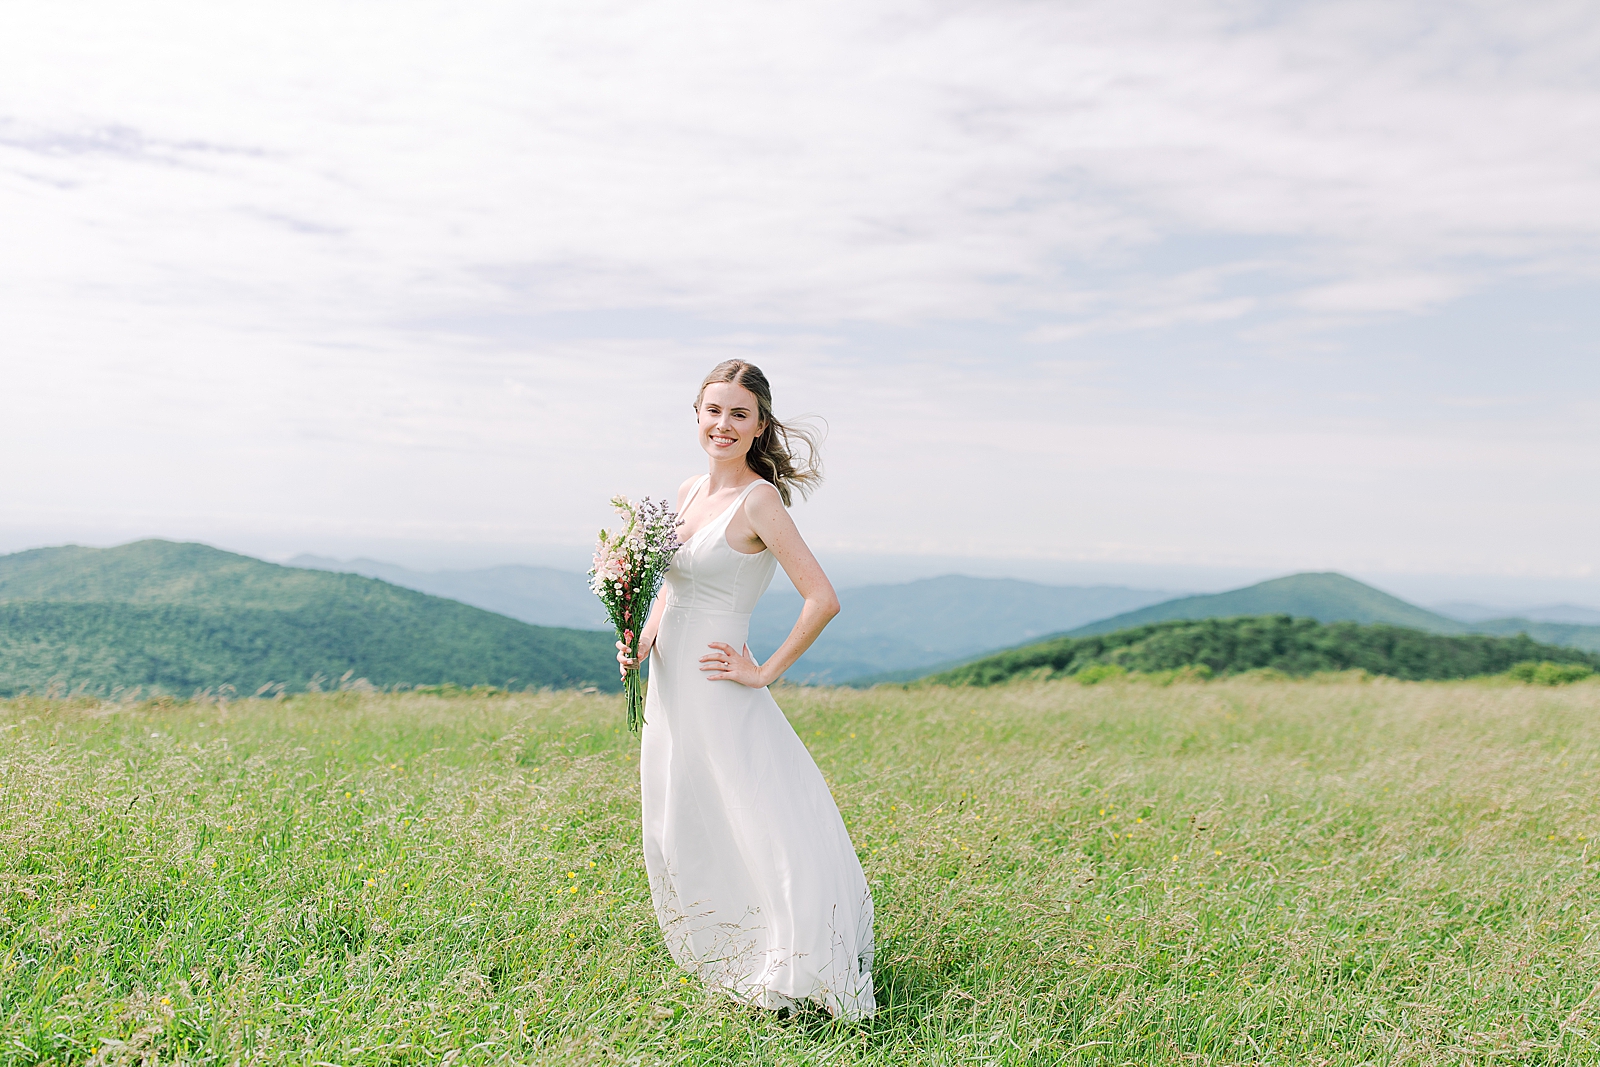 Max Patch Elopement Bride Smiling in Filed Photo